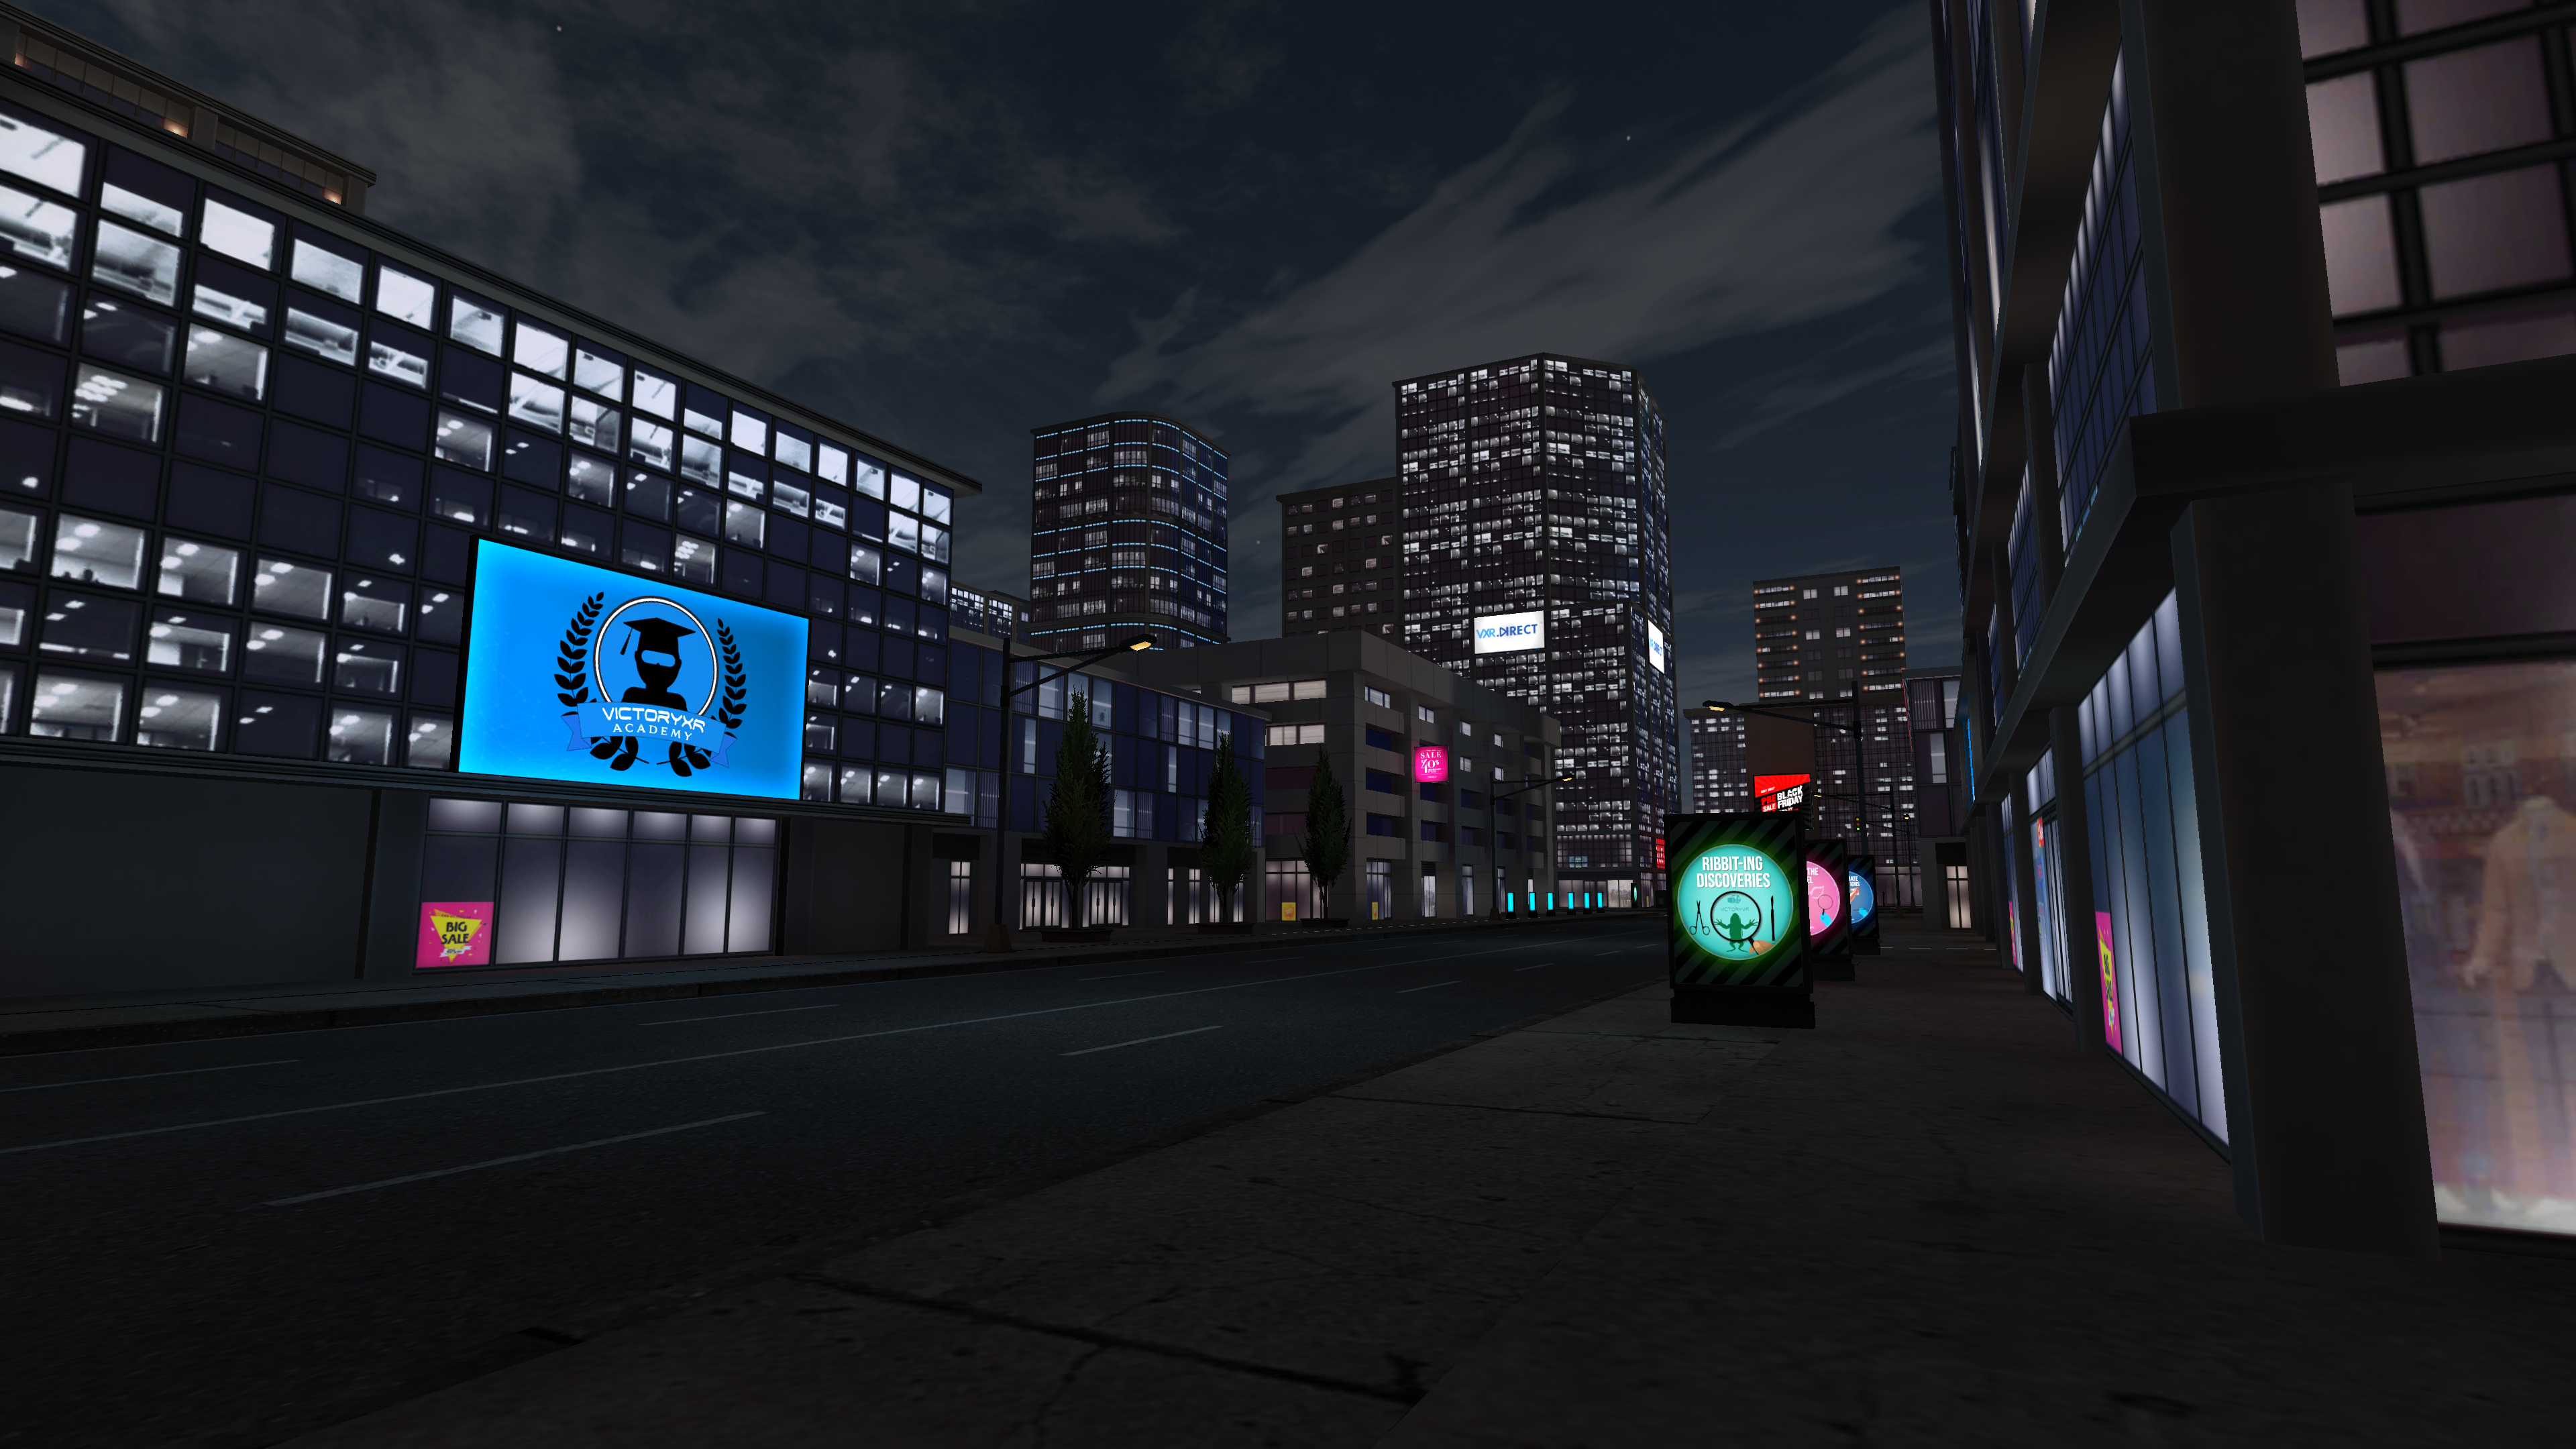 Picture 4 – Lesson 4 Location “A City at Night”, has buildings and lights at night with a screen